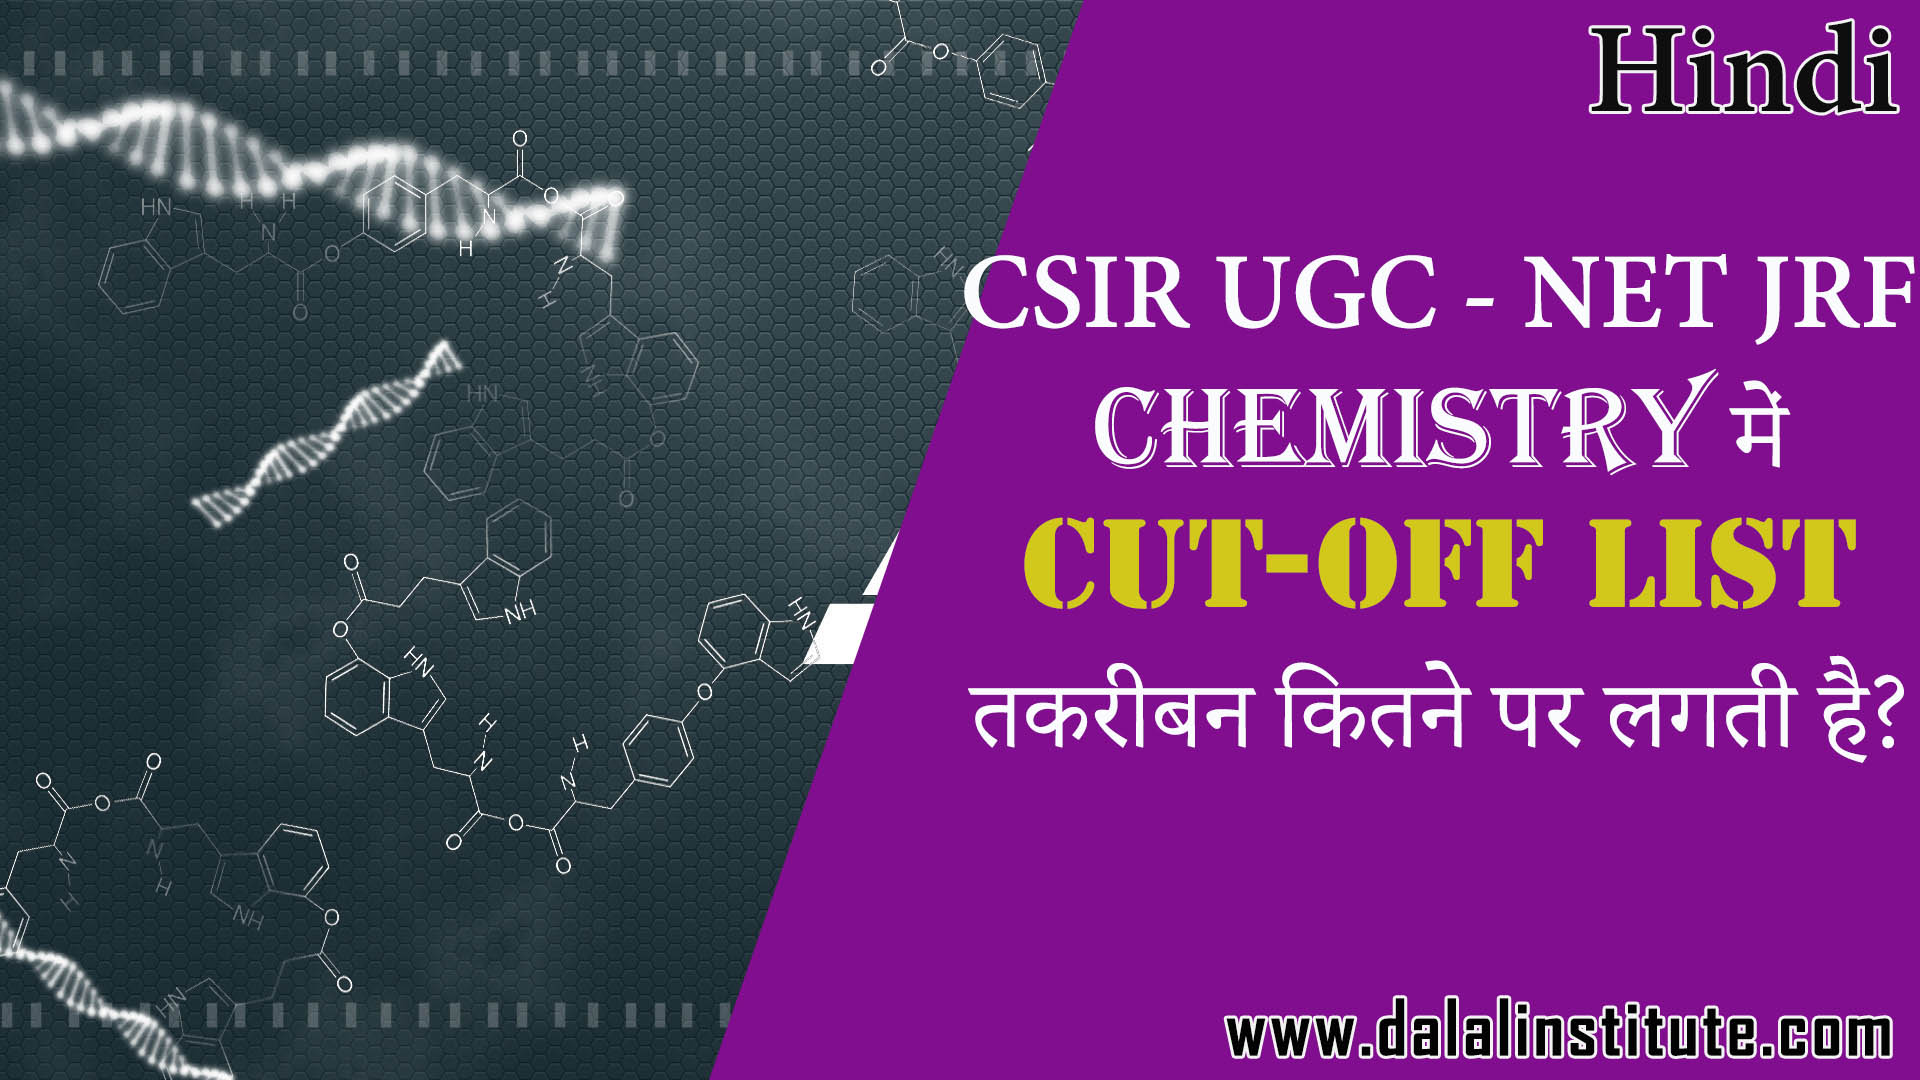 You are currently viewing General Cut-Off List of CSIR UGC – NET JRF (Chemical Science or Chemistry)